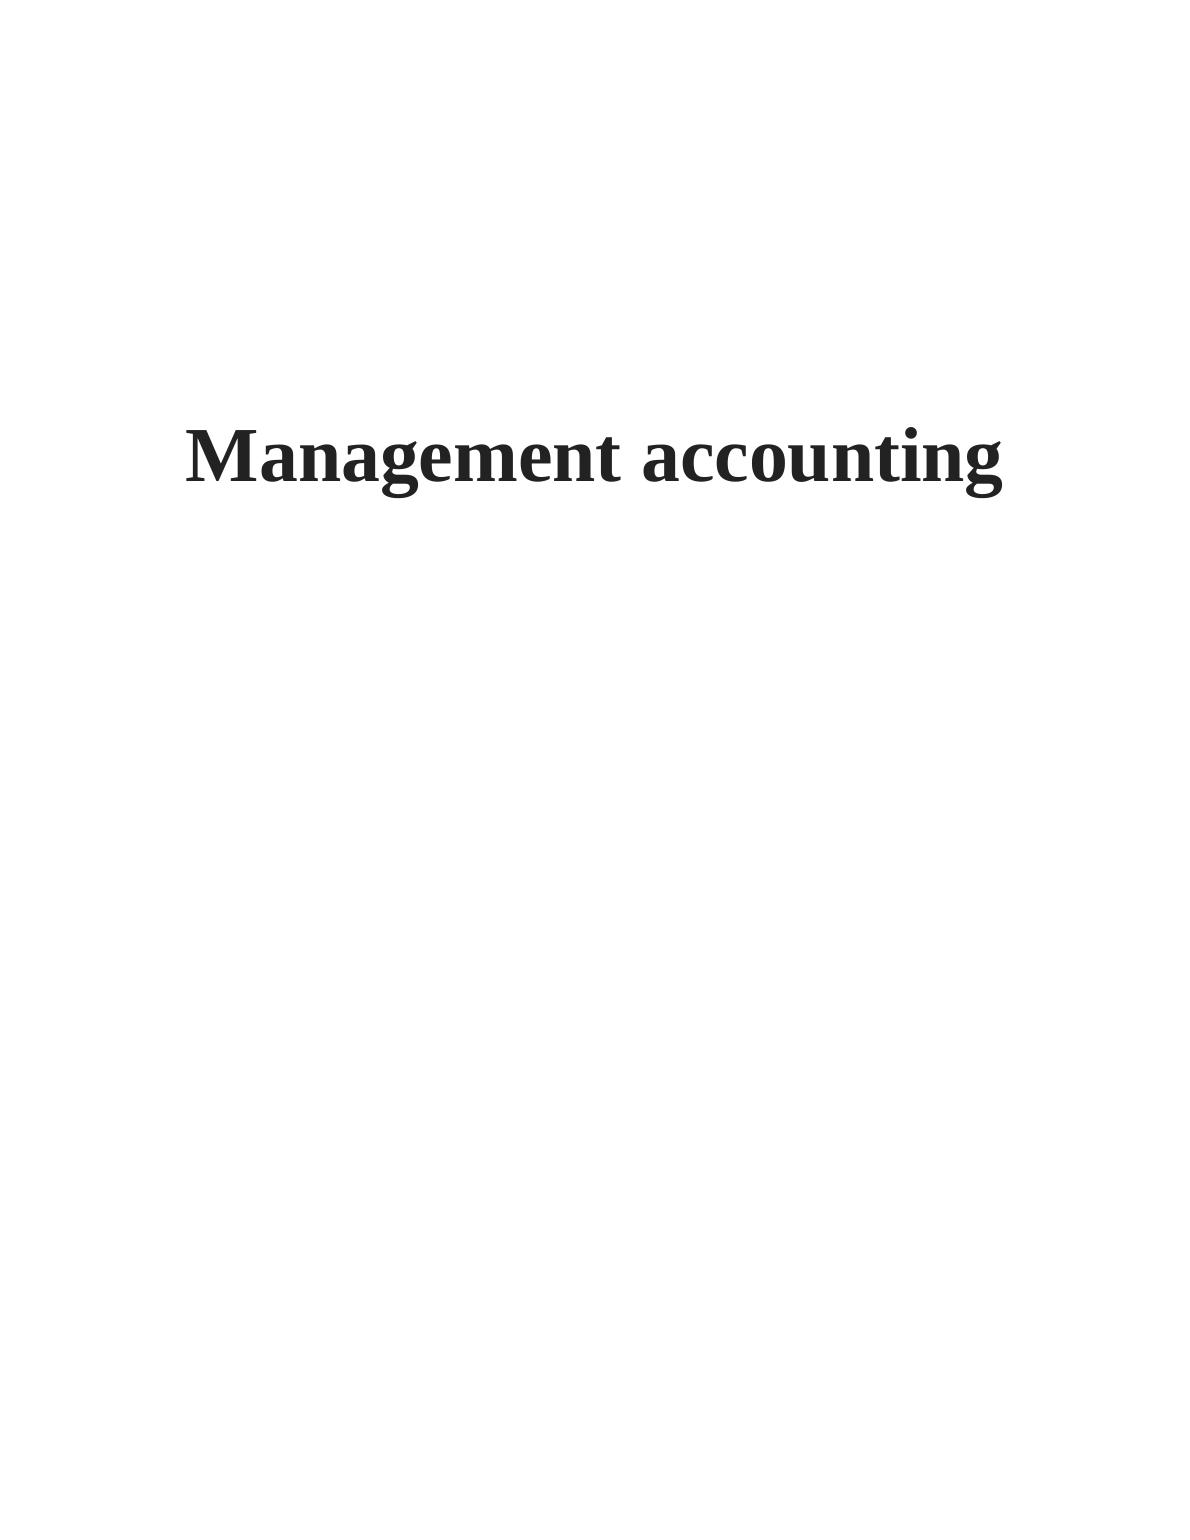 Management Accounting System and Requirements Doc_1